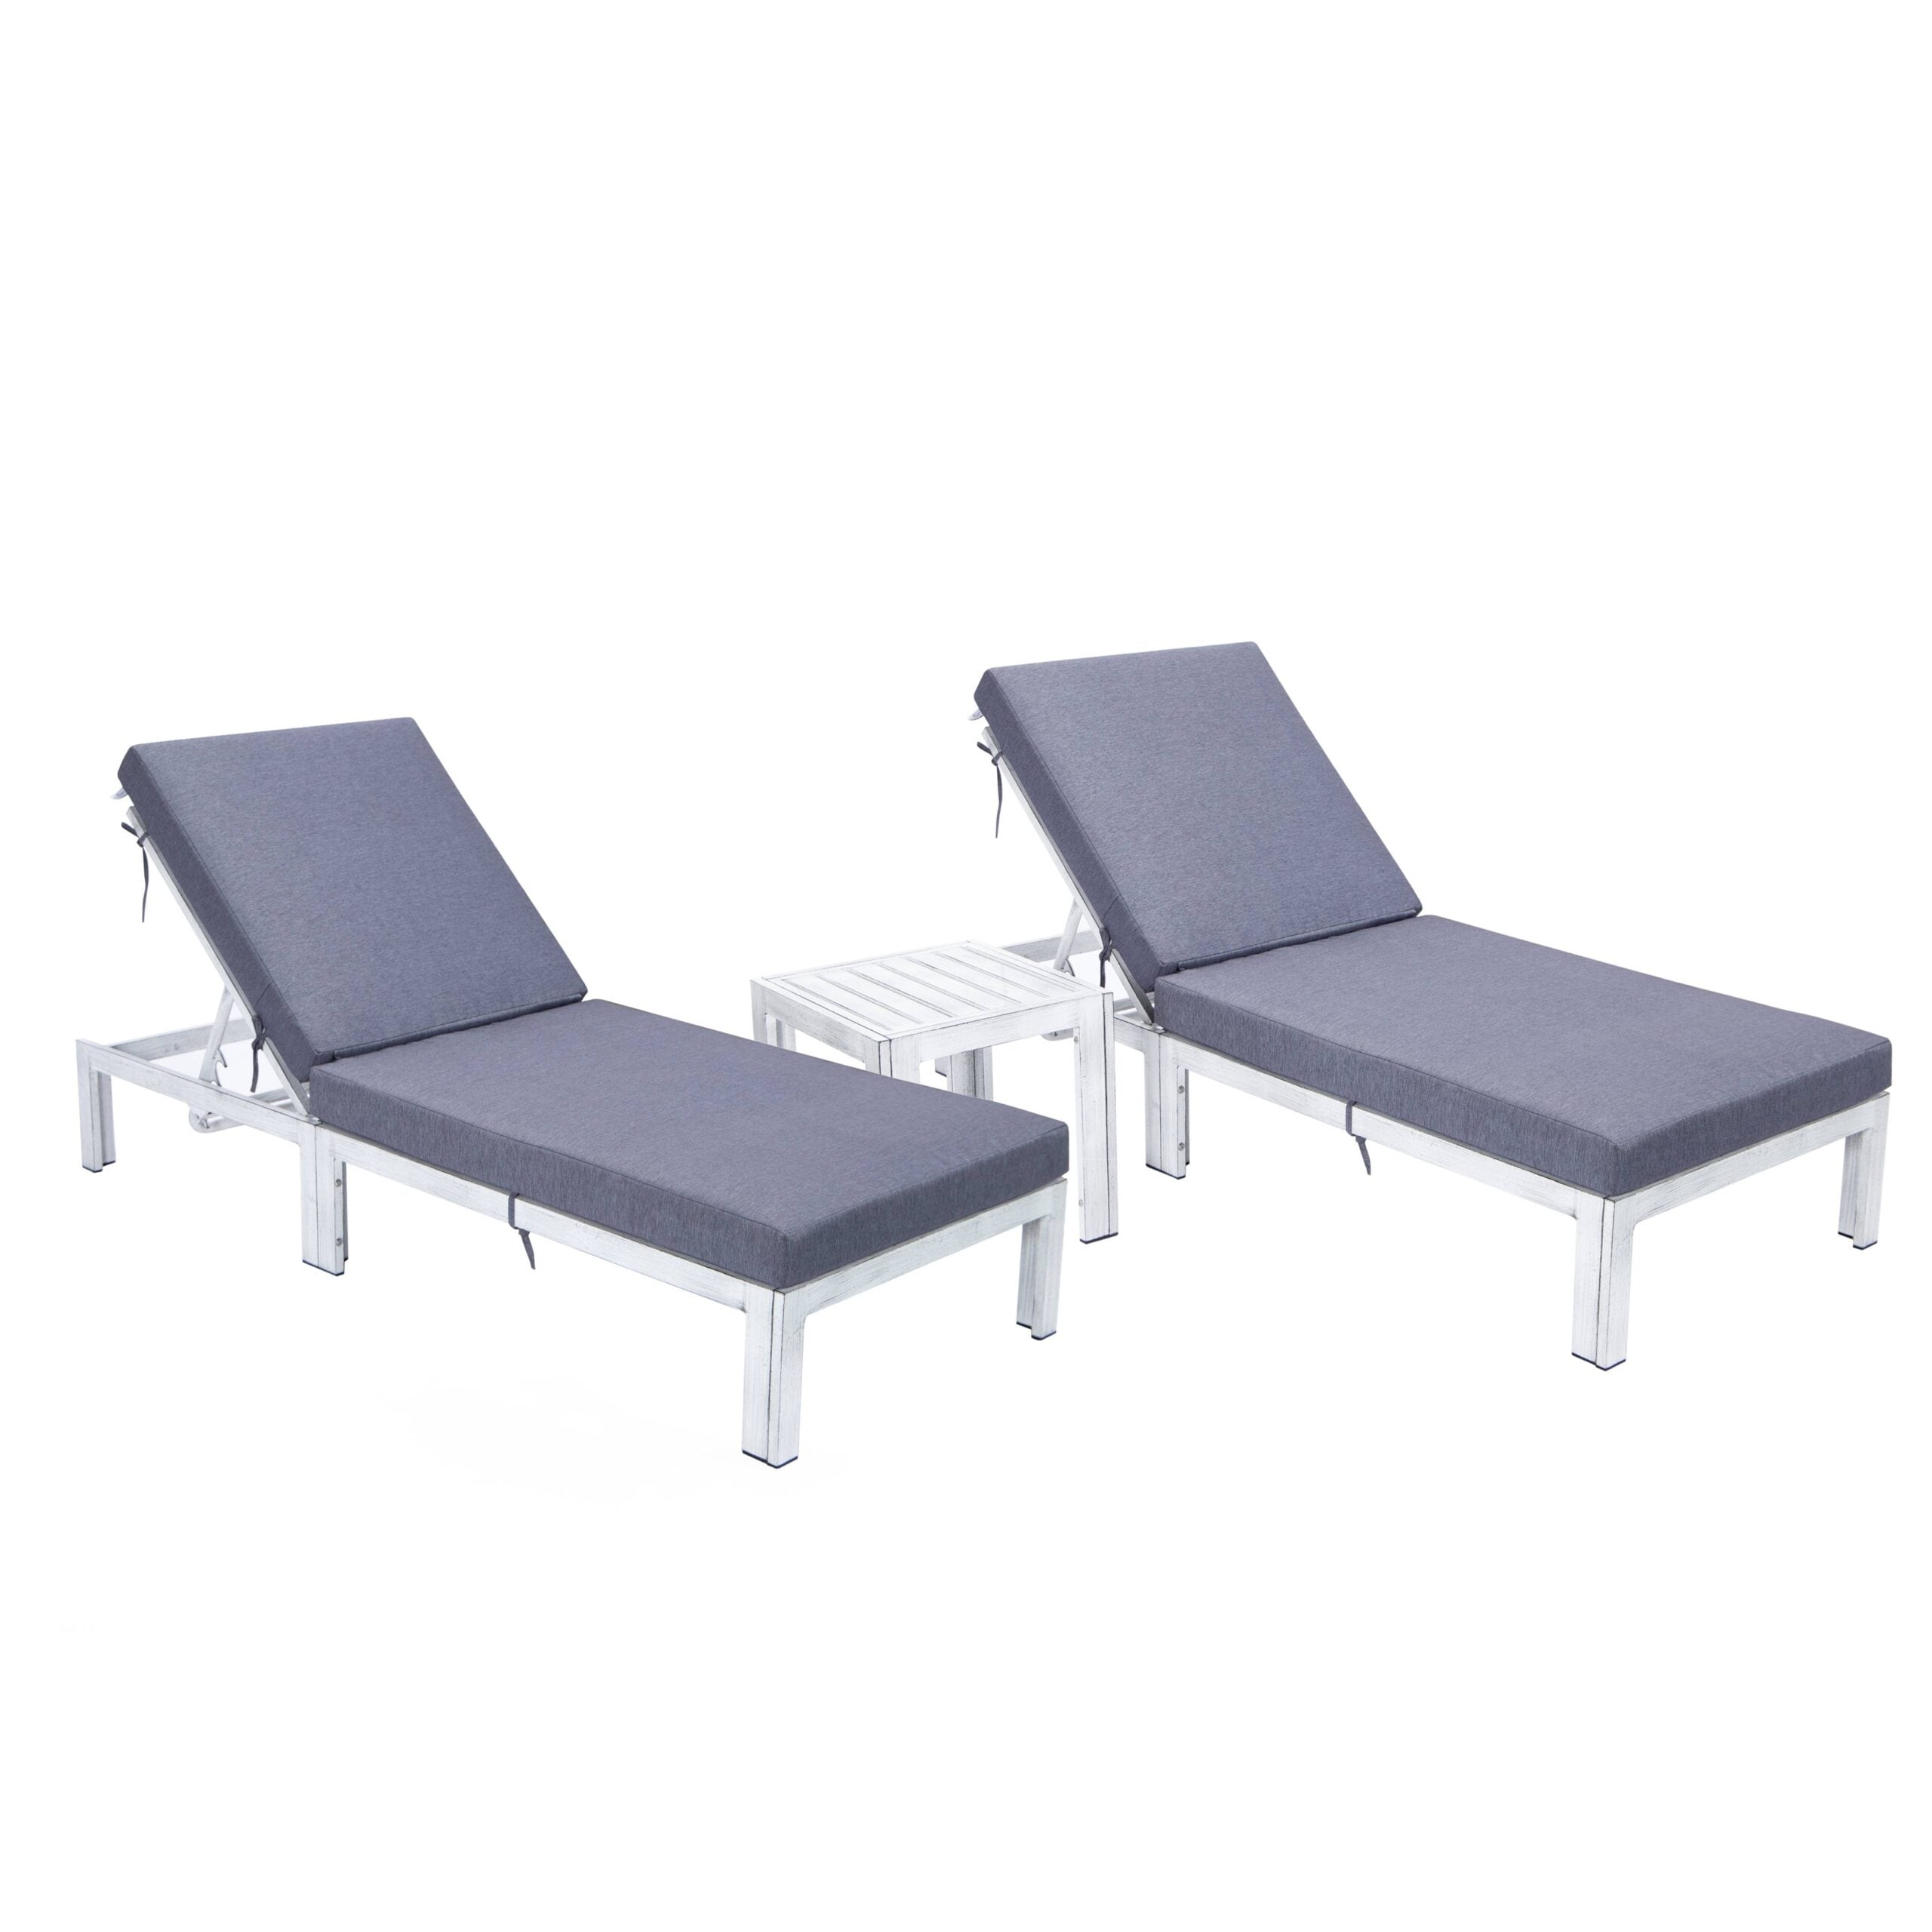 Leisuremod Chelsea Grey Chaise Lounge Chair Set Of 2 With Side Table